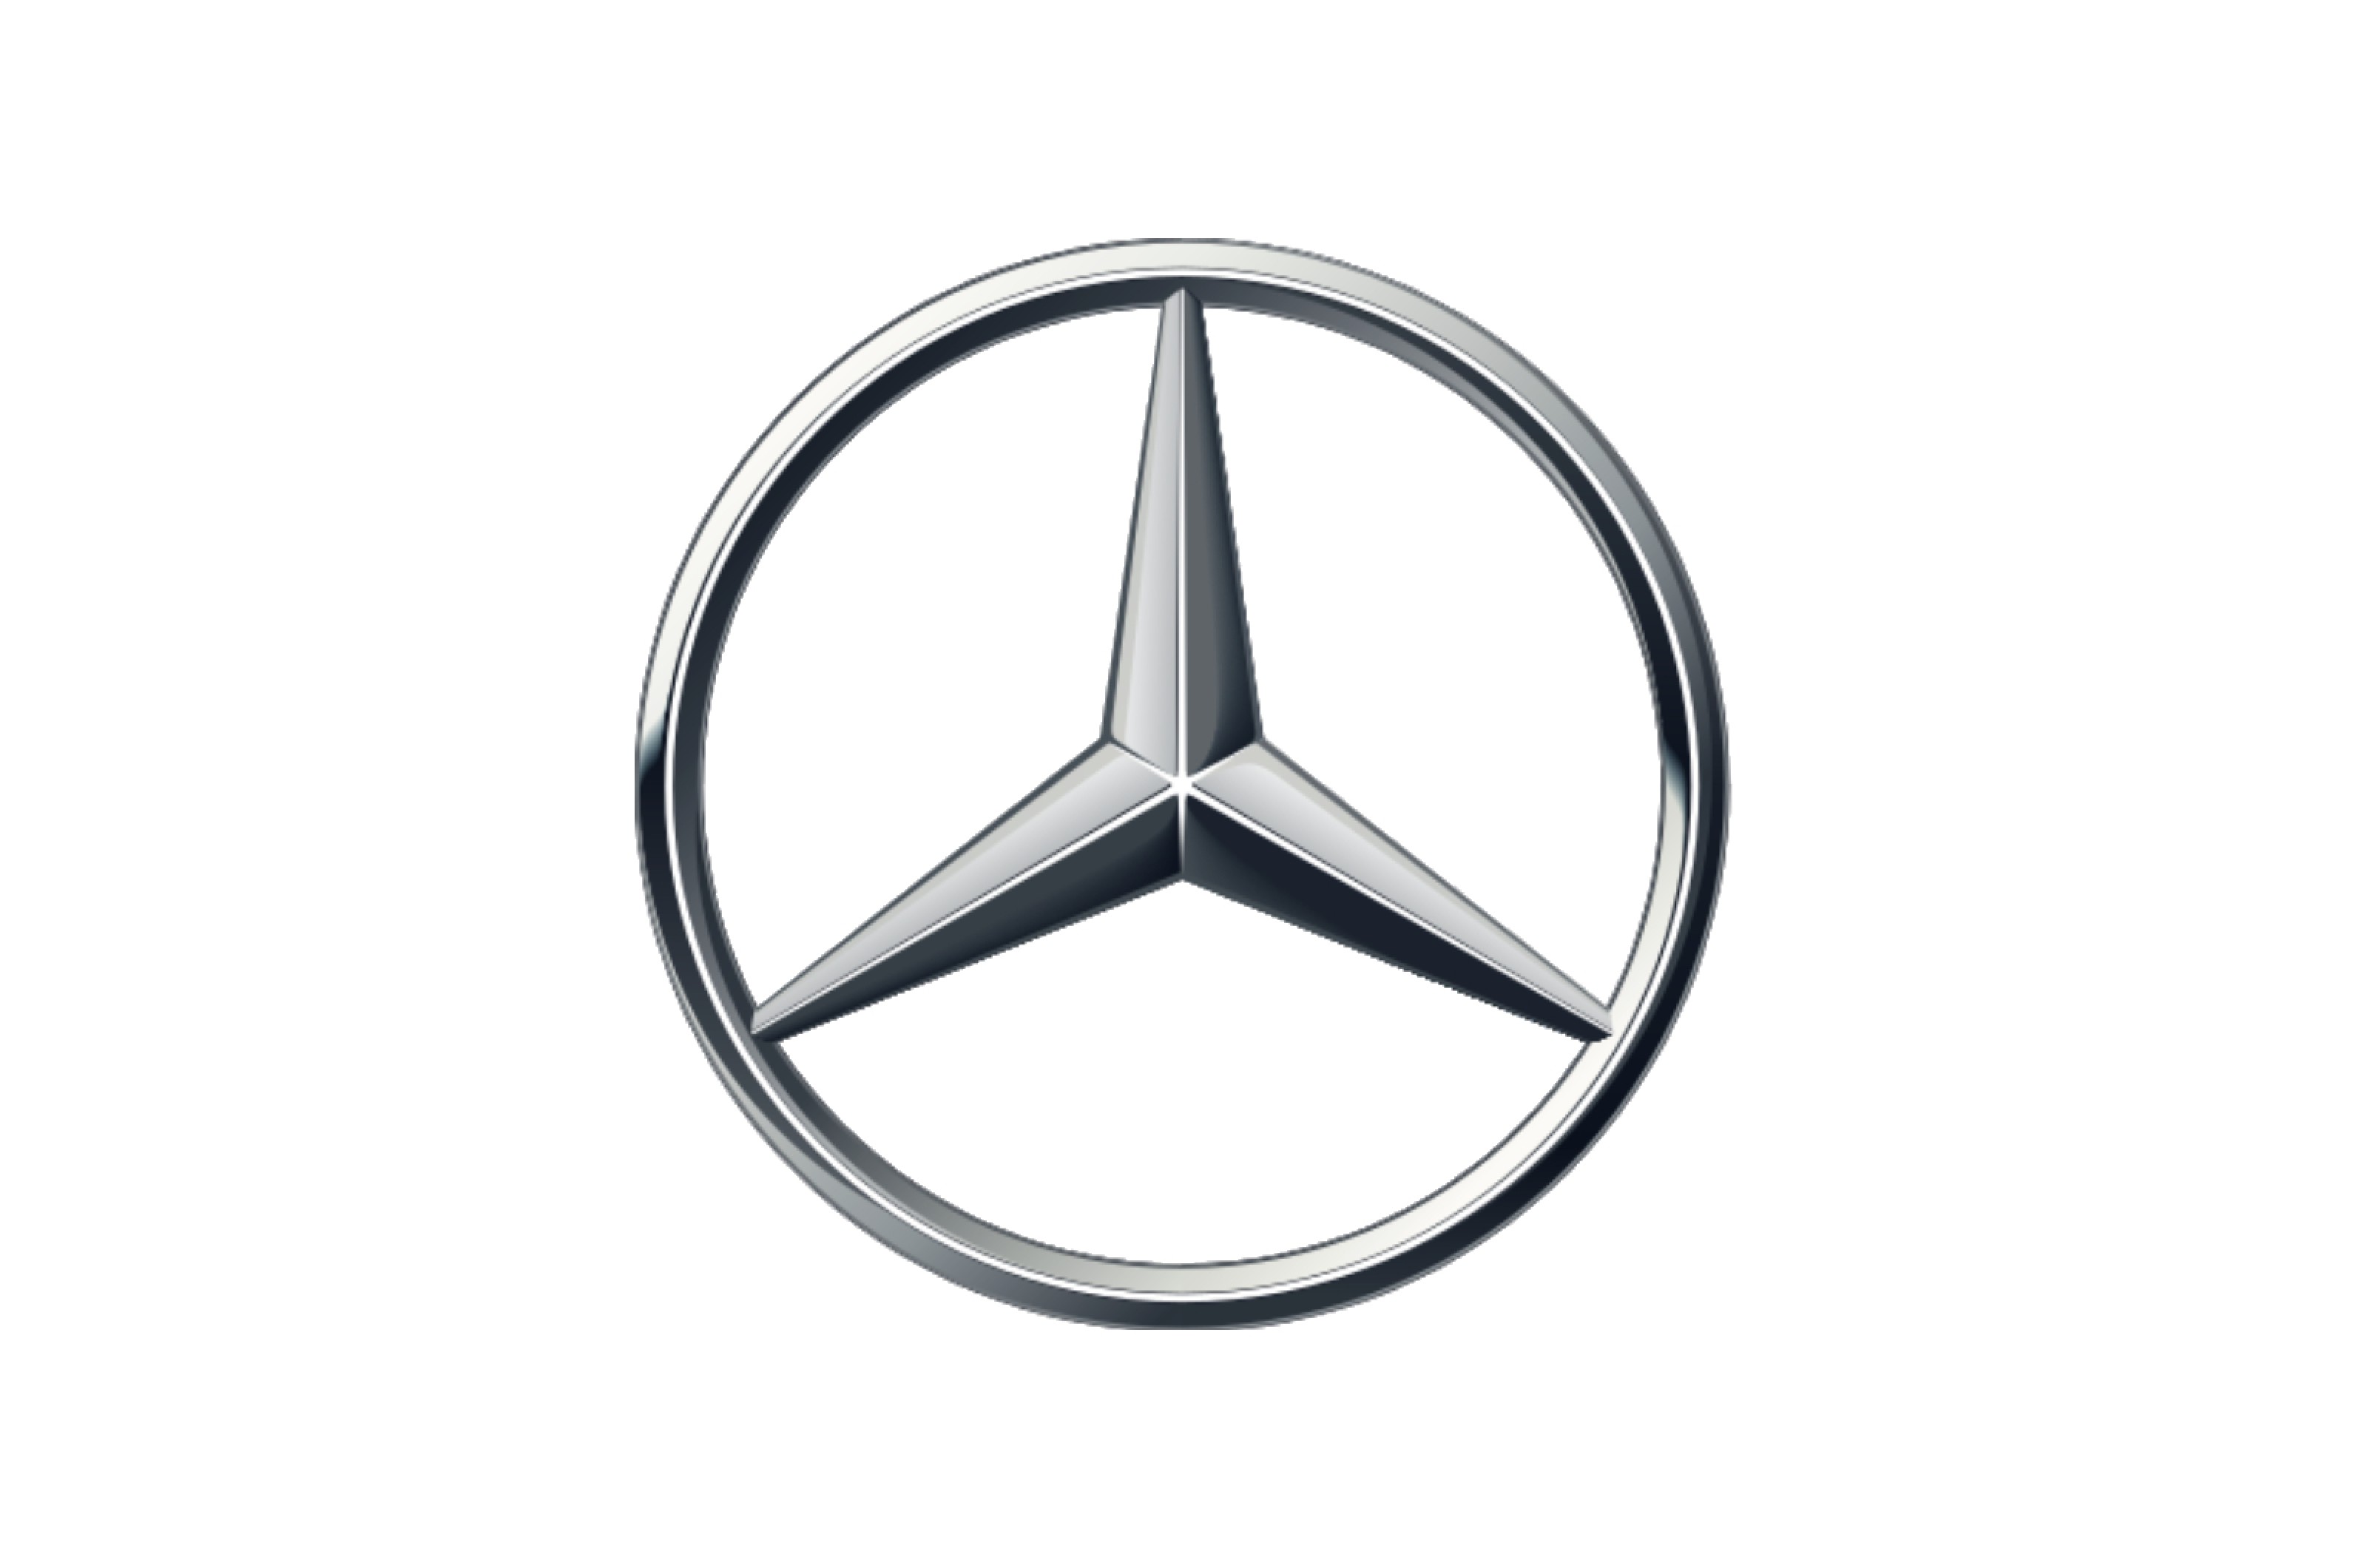 <p>The three-pointed star was first used by Mercedes as early as 1909.</p>  <p>To begin with, there was nothing surrounding it, but in 1916 it was placed in a circle for the first time. When Mercedes merged with Benz 10 years later, the border of the circle was enlarged so that it could include the Benz’s laurel wreath emblem.</p>  <p>The Benz reference didn’t last long. The logo soon became simply a black star within a black circle.</p>  <p>It was later adapted further, taking on a metallic, three-dimensional look which Mercedes-Benz, contrary to current fashion, has not so far flattened.</p>